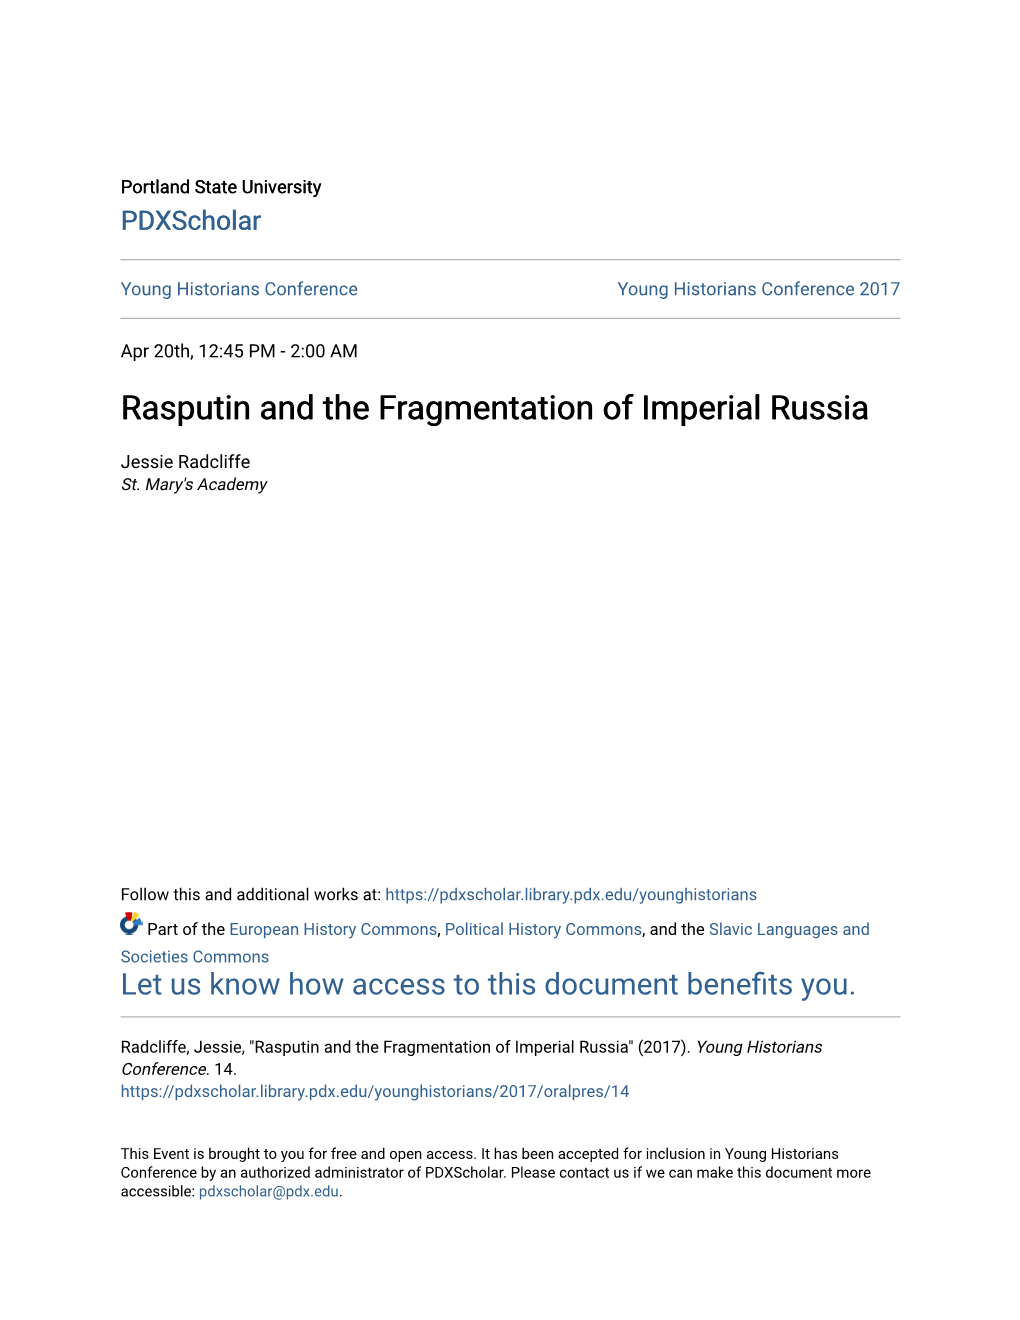 Rasputin and the Fragmentation of Imperial Russia